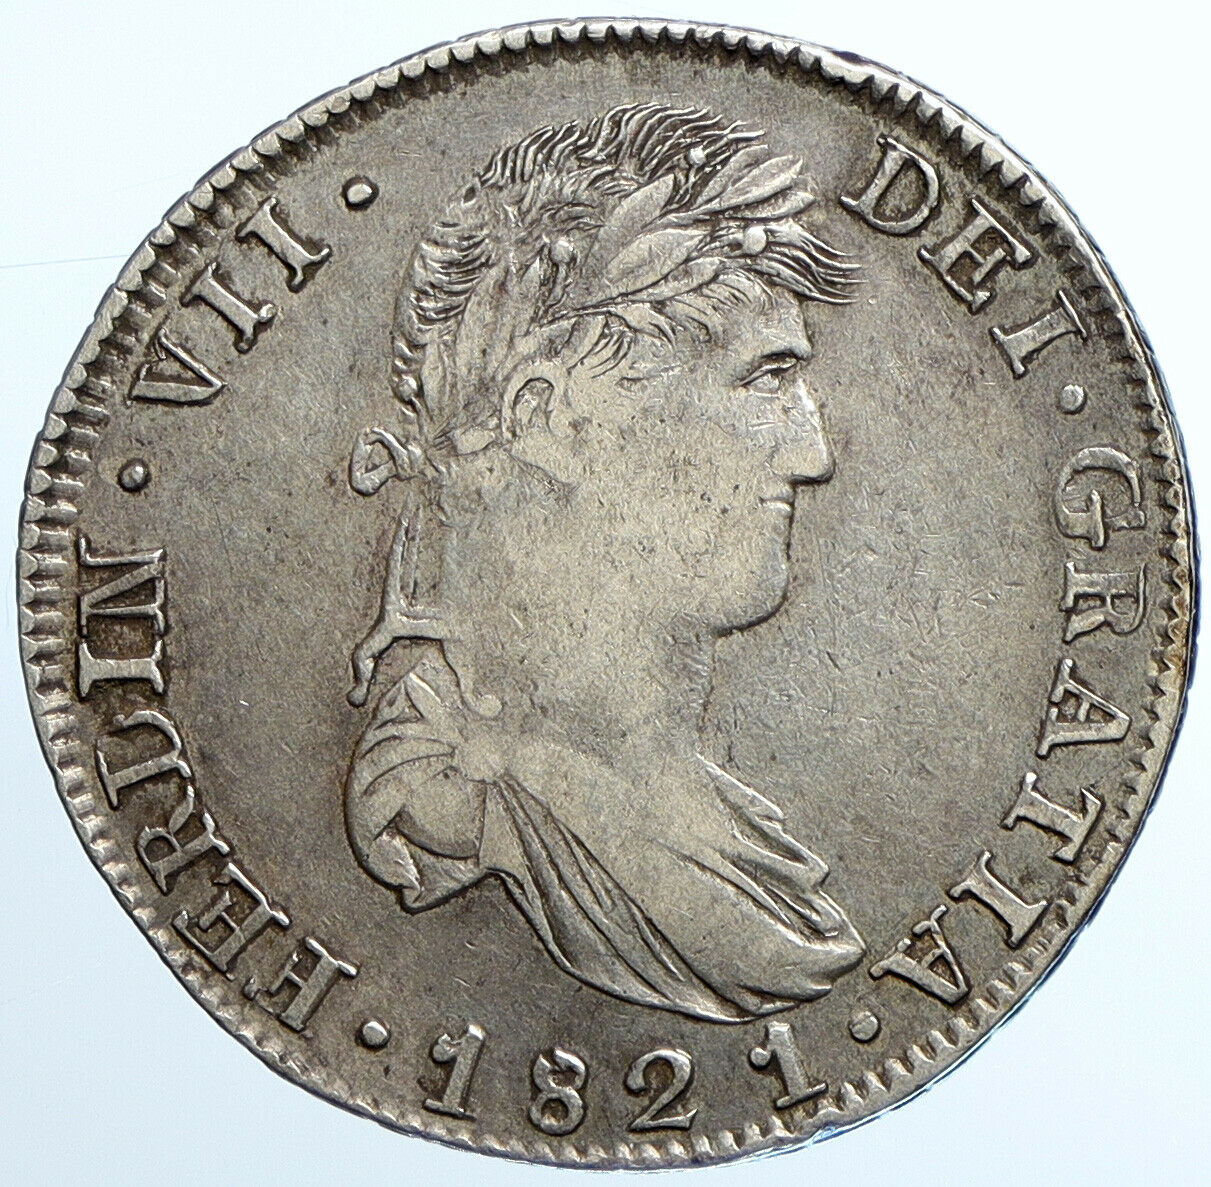 1821 Zs RG MEXICO SPAIN King FERDINAND VII Antique Silver 8 Reales Coin i109785